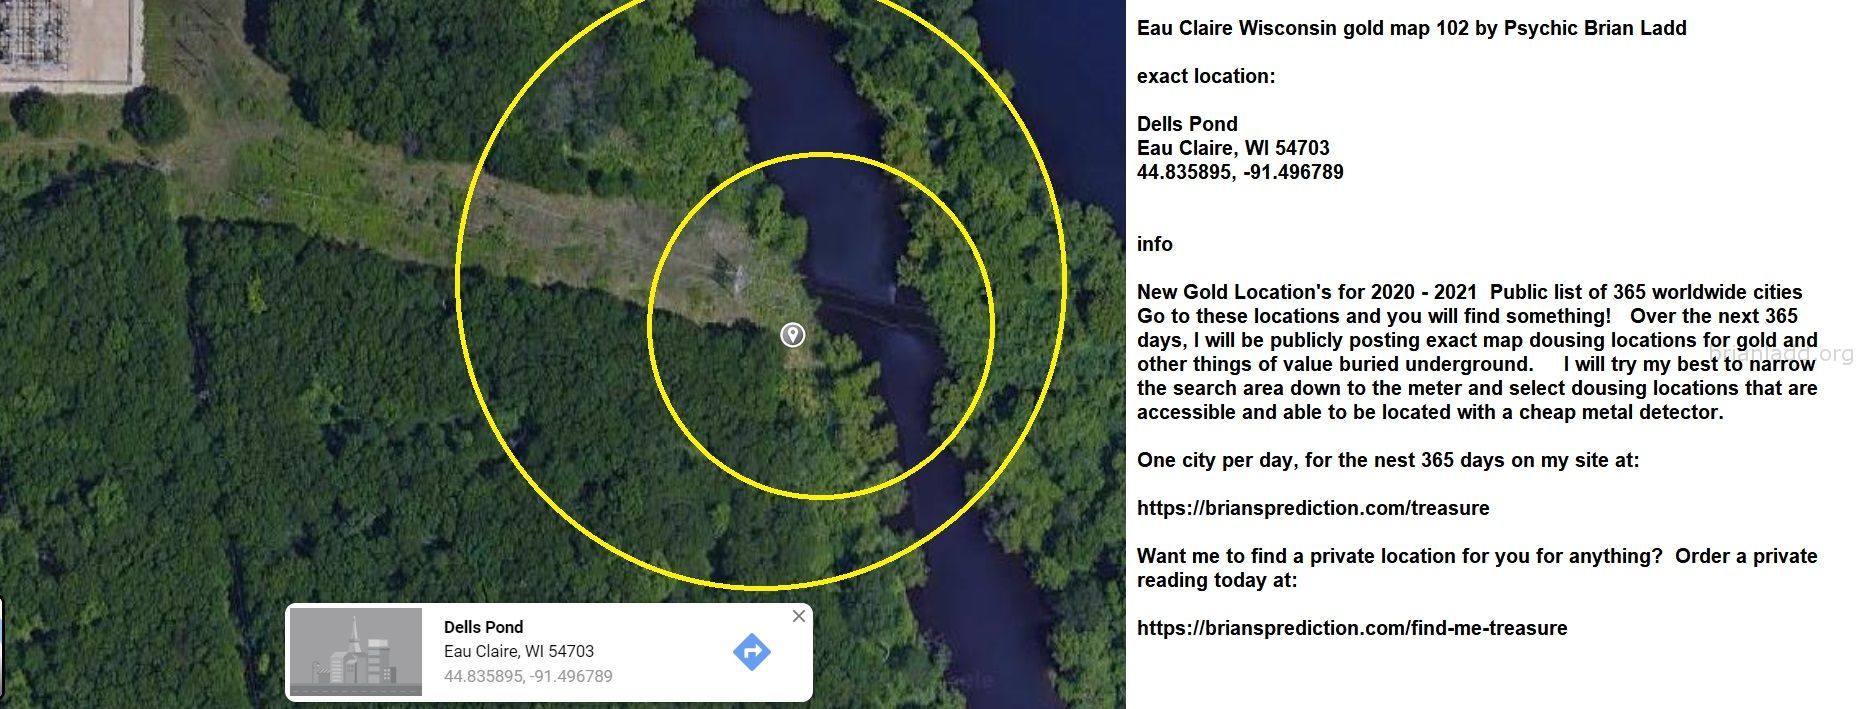 Eau Claire Wisconsin Gold Map 102 By Psychic Brian Ladd - Eau Claire Wisconsin Gold Map 102 By Psychic Brian Ladd  Exact...
Eau Claire Wisconsin Gold Map 102 By Psychic Brian Ladd  Exact Location:  Dells Pond  Eau Claire, Wi 54703  44.835895, -91.496789  Info  New Gold Location'S For 2020 - 2021  Public List Of 365 Worldwide Cities  Go To These Locations And You Will Find Something!  Over The Next 365 Days, I Will Be Publicly Posting Exact Map Dousing Locations For Gold And Other Things Of Value Buried Underground.  I Will Try My Best To Narrow The Search Area Down To The Meter And Select Dousing Locations That Are Accessible And Able To Be Located With A Cheap Metal Detector.  One City Per Day, For The Nest 365 Days On My Site At:   https://briansprediction.com/Treasure  Want Me To Find A Private Location For You For Anything?  Order A Private Reading Today At:   https://briansprediction.com/Find-Me-Treasure
